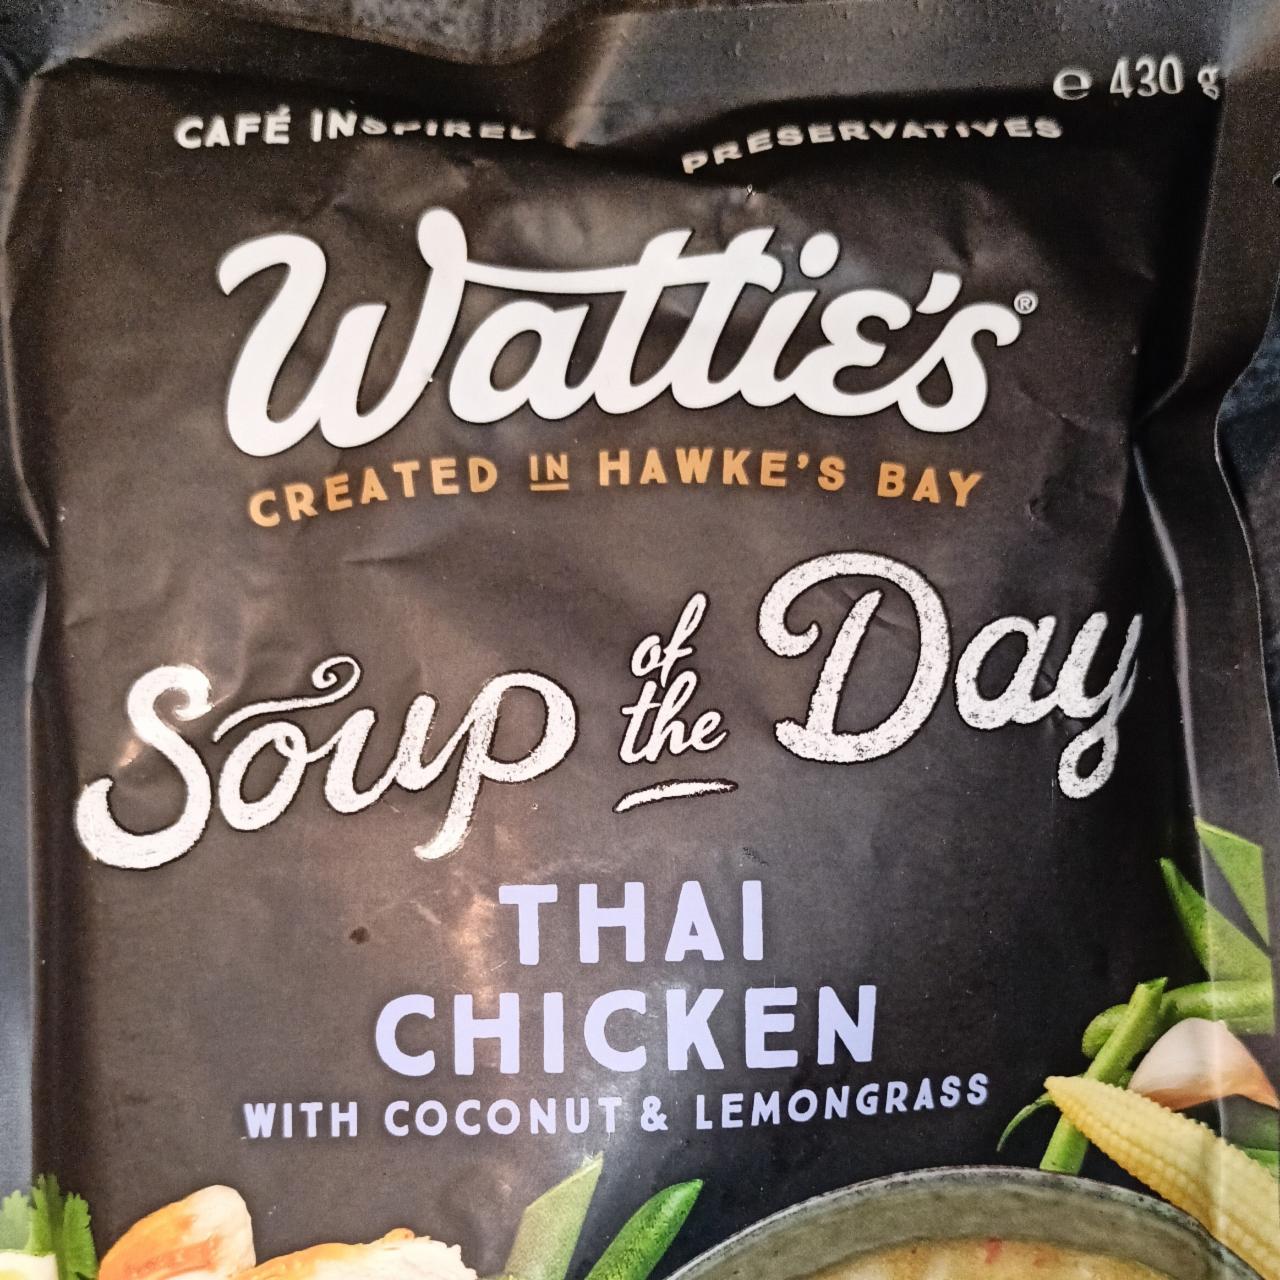 Fotografie - Wattie's Soup of the Day Thai Chicken with Coconut & Lemongrass